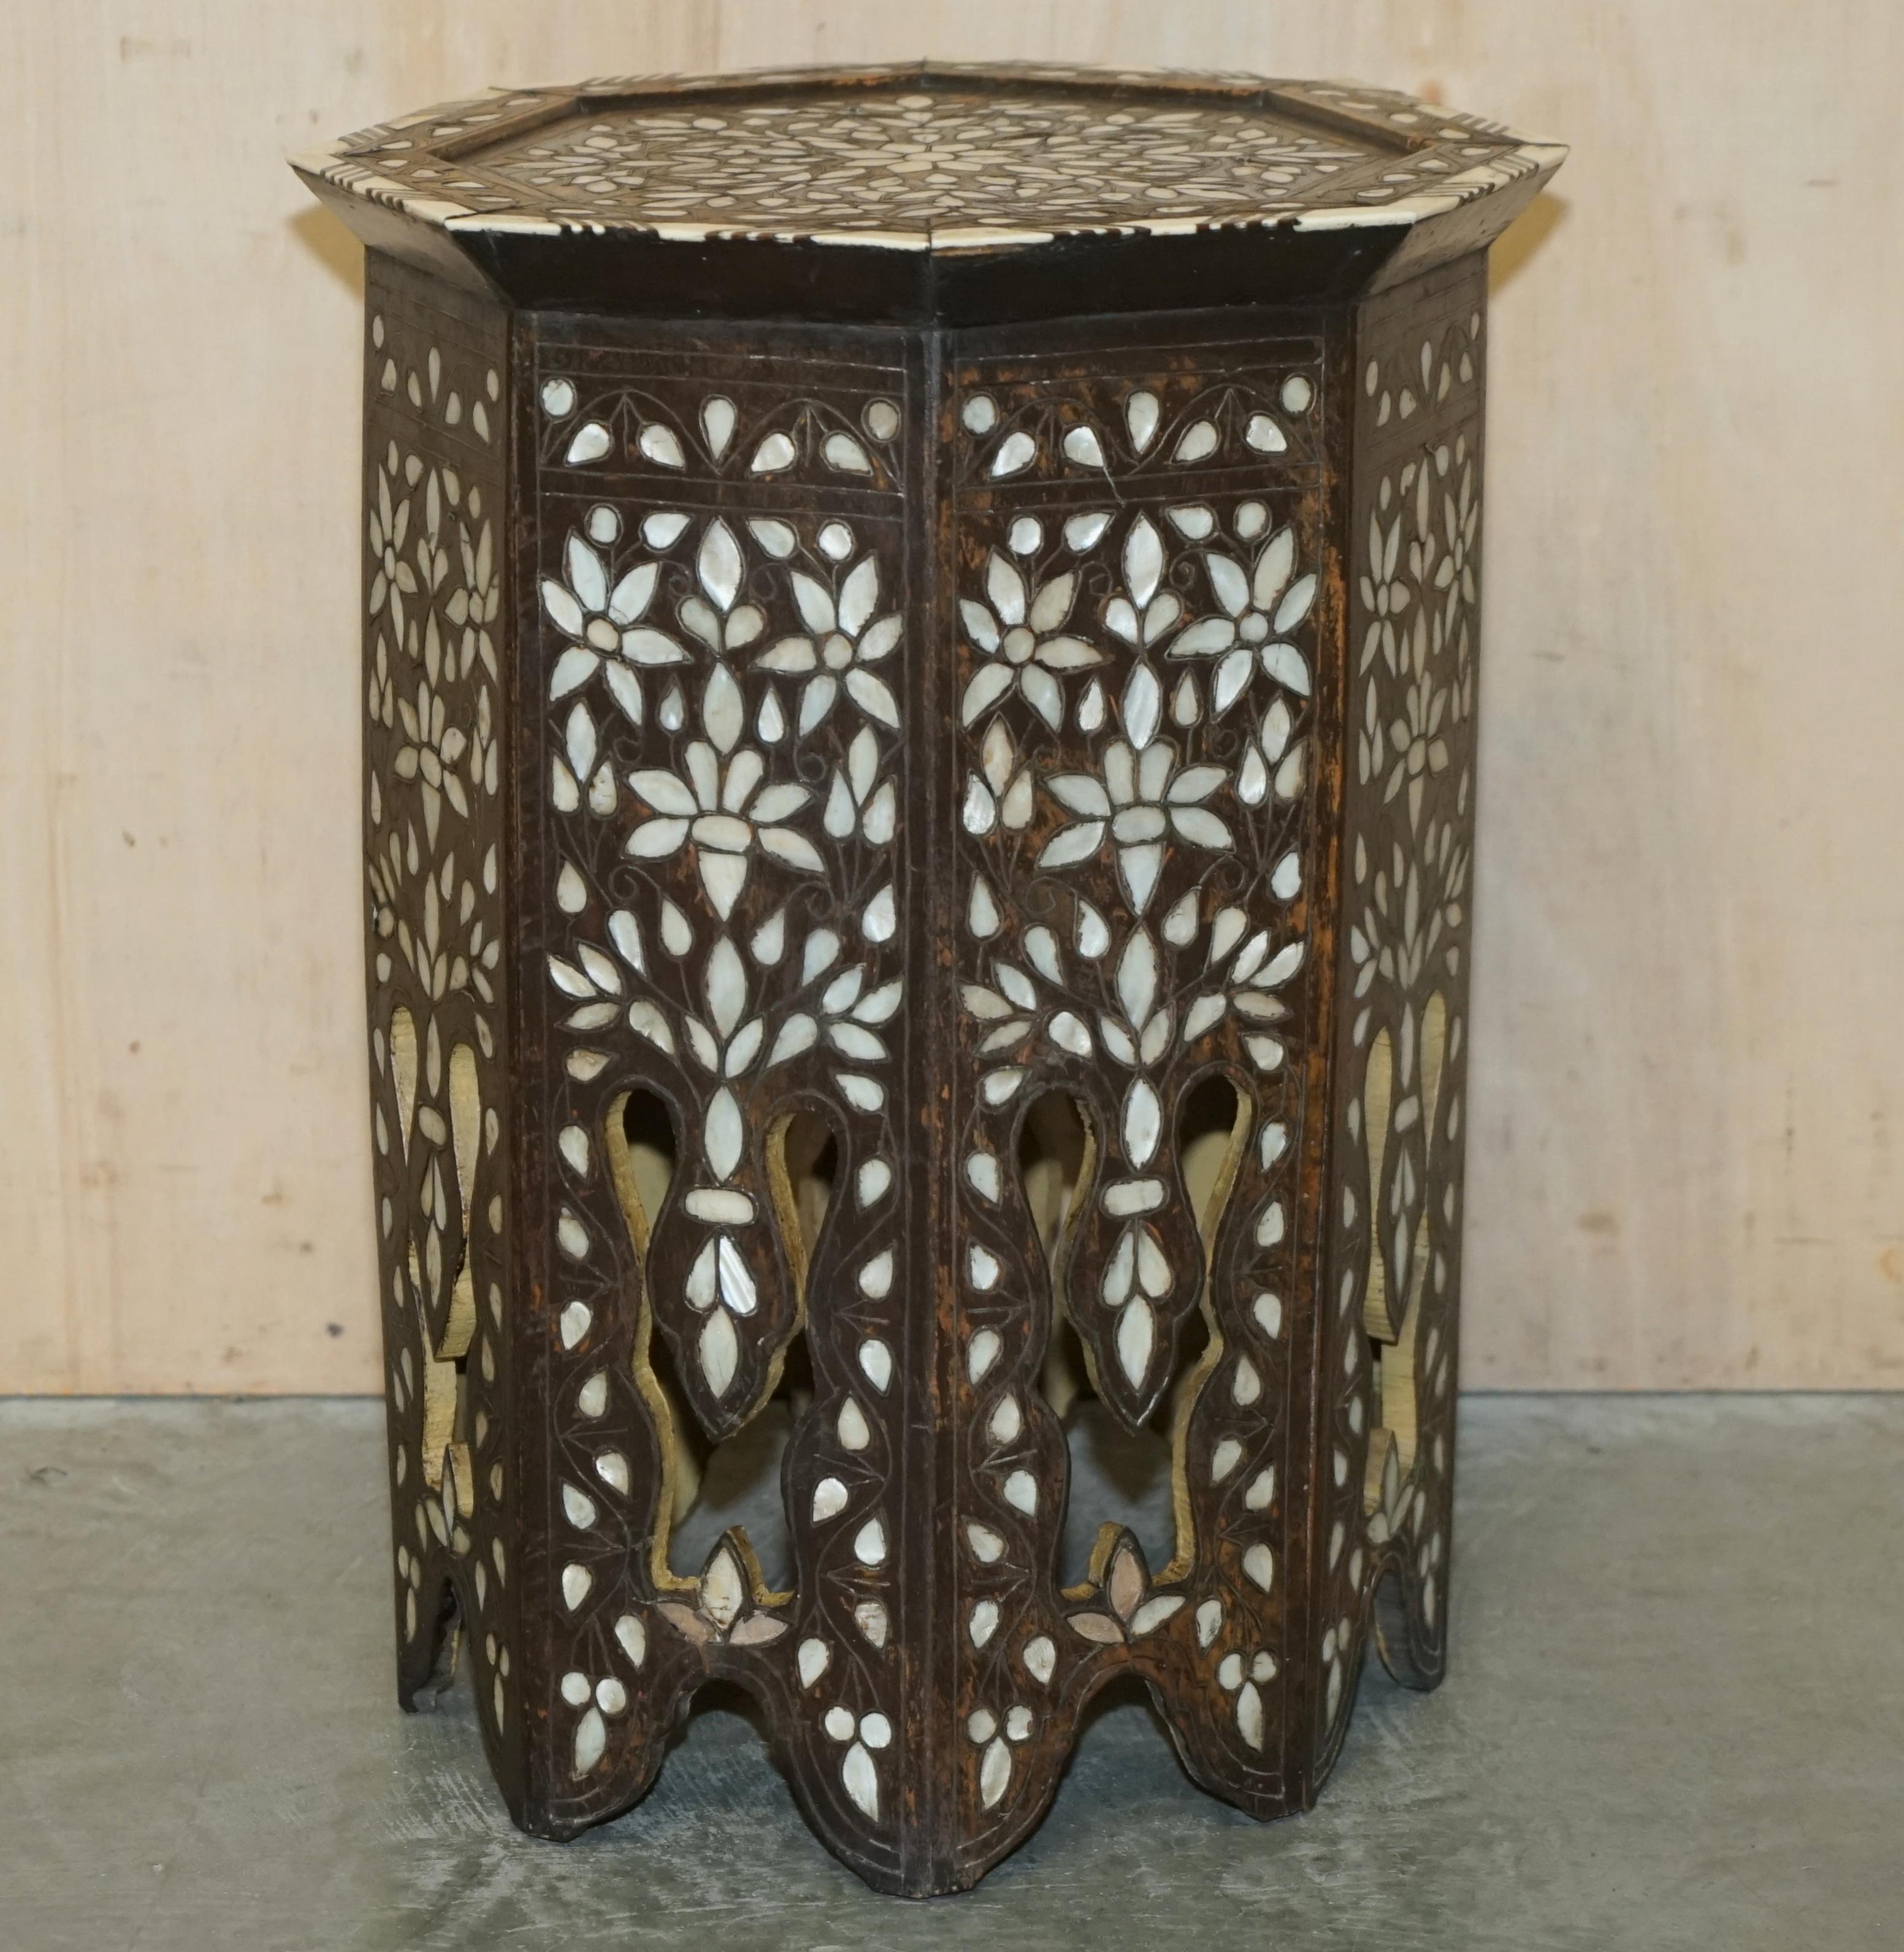 Royal House Antiques

Royal House Antiques is delighted to offer for sale this lovely and rare Syrian hand carved and inlaid side table, retailed through Liberty's London circa 1880

Please note the delivery fee listed is just a guide, it covers